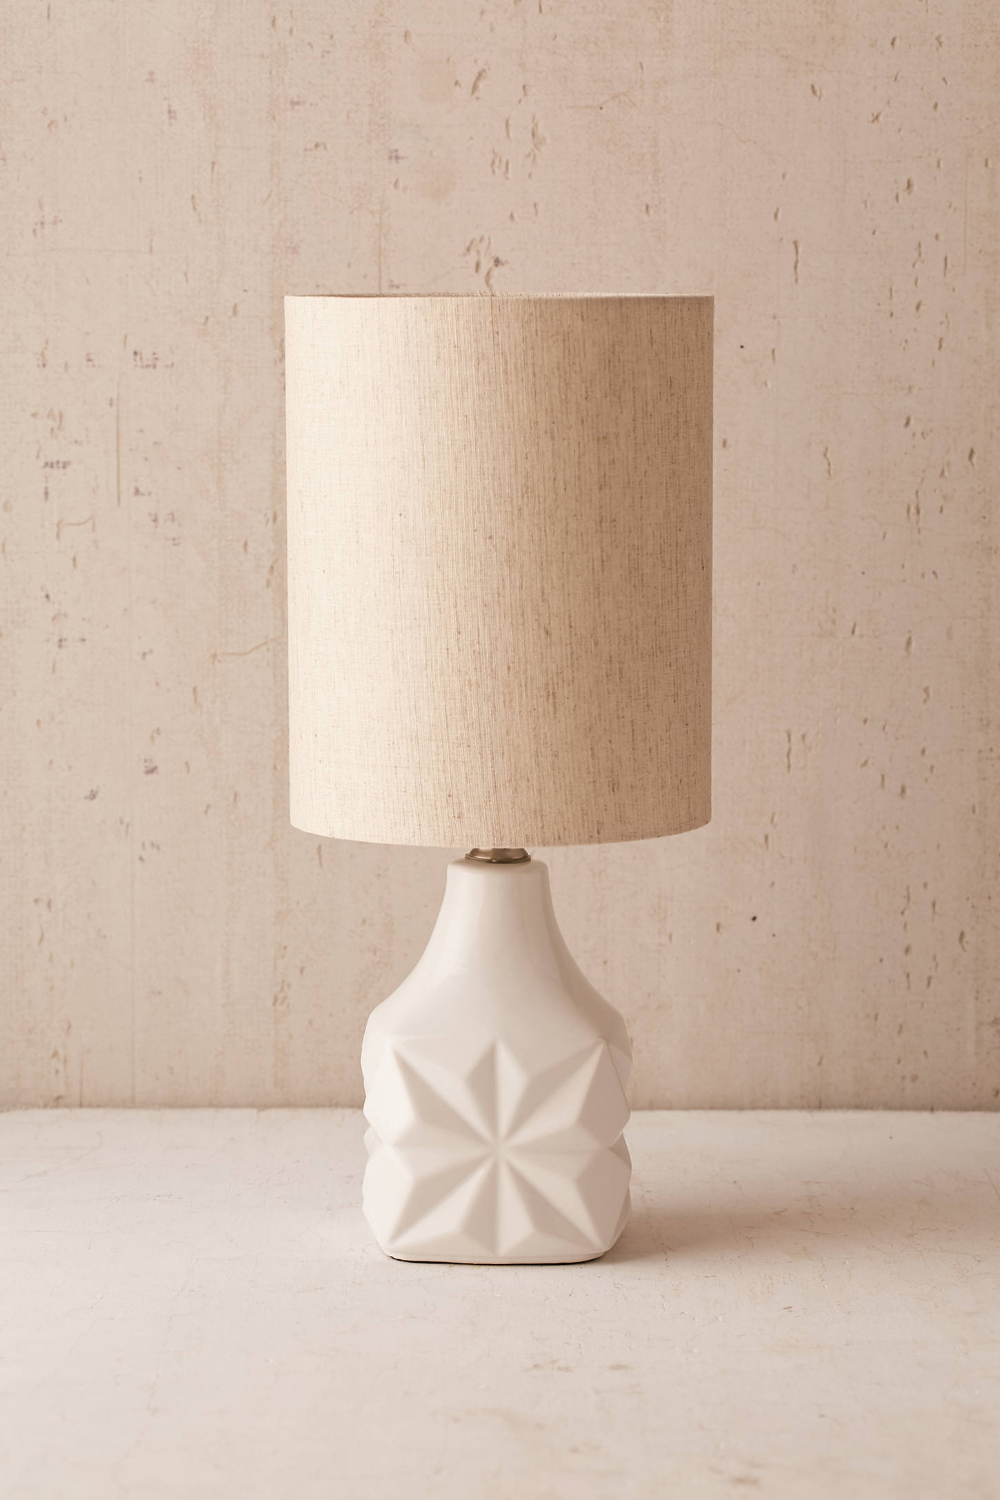 Urban Outfitters Mandy Table Lamp - Urban Outfitters Mandy Table Lamp -   19 diy Lamp bedside ideas